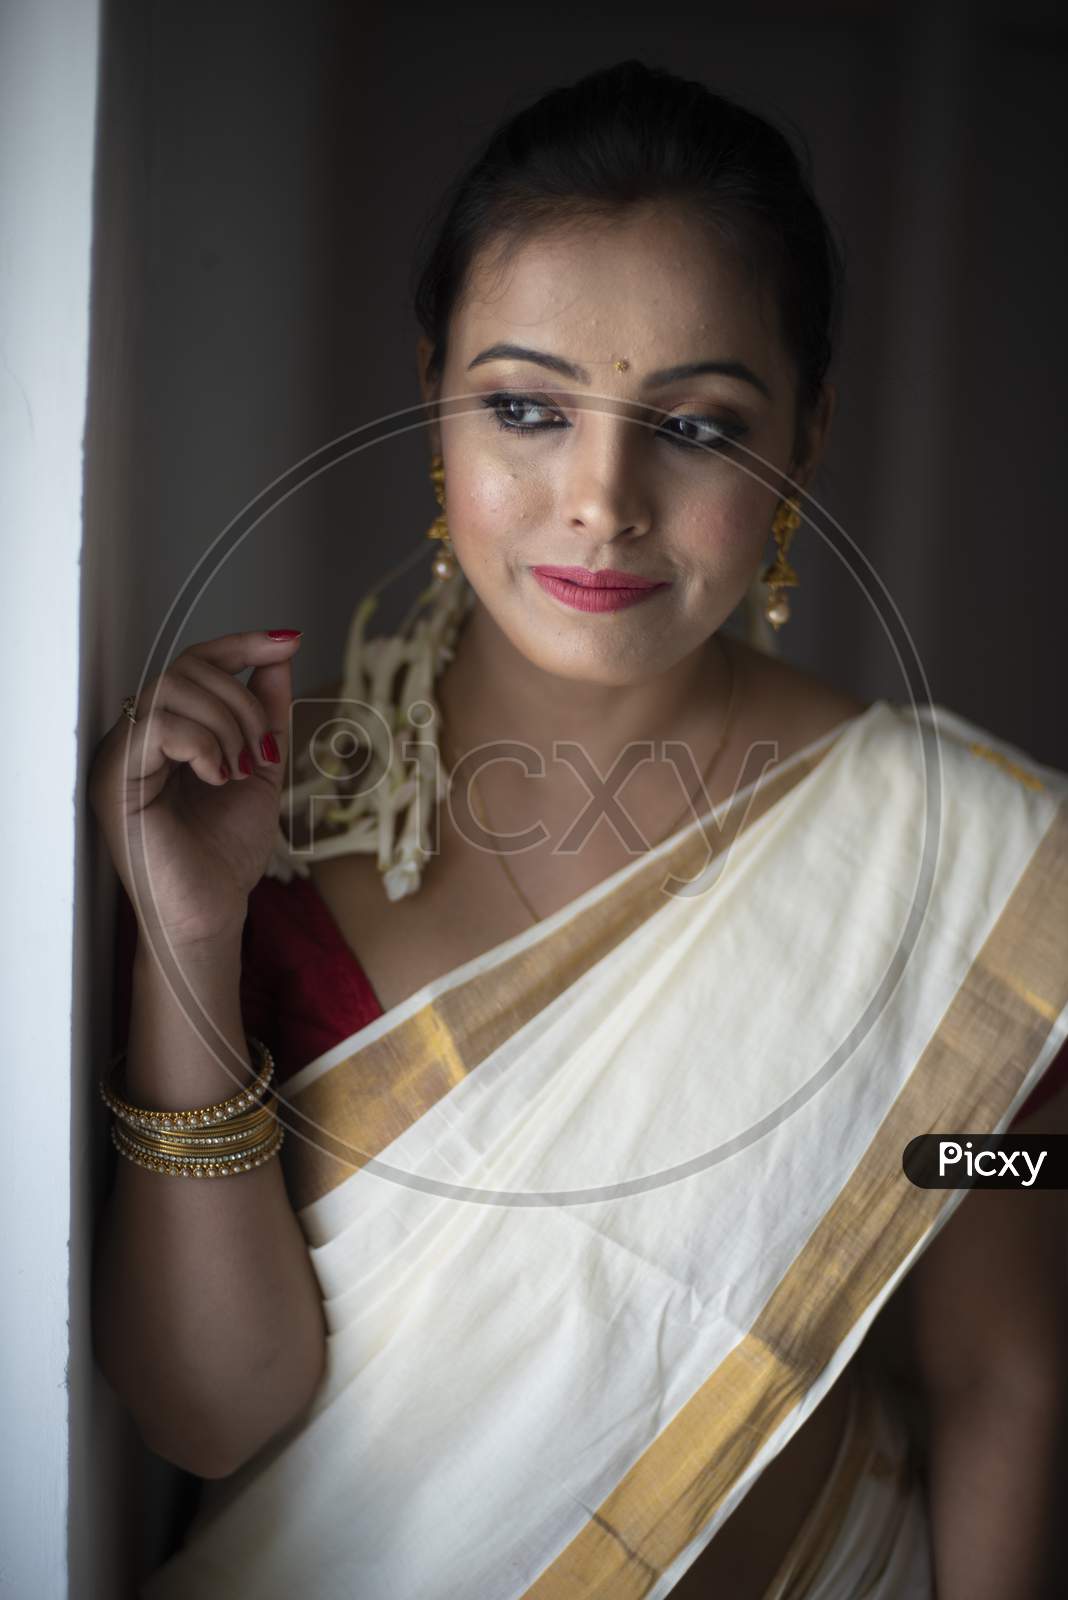 An young and attractive Indian woman in white traditional sari and red blouse and flowers is smiling while Standing at a Balcony and Posing   for the celebration of Onam/Pongal. Indian lifestyle.